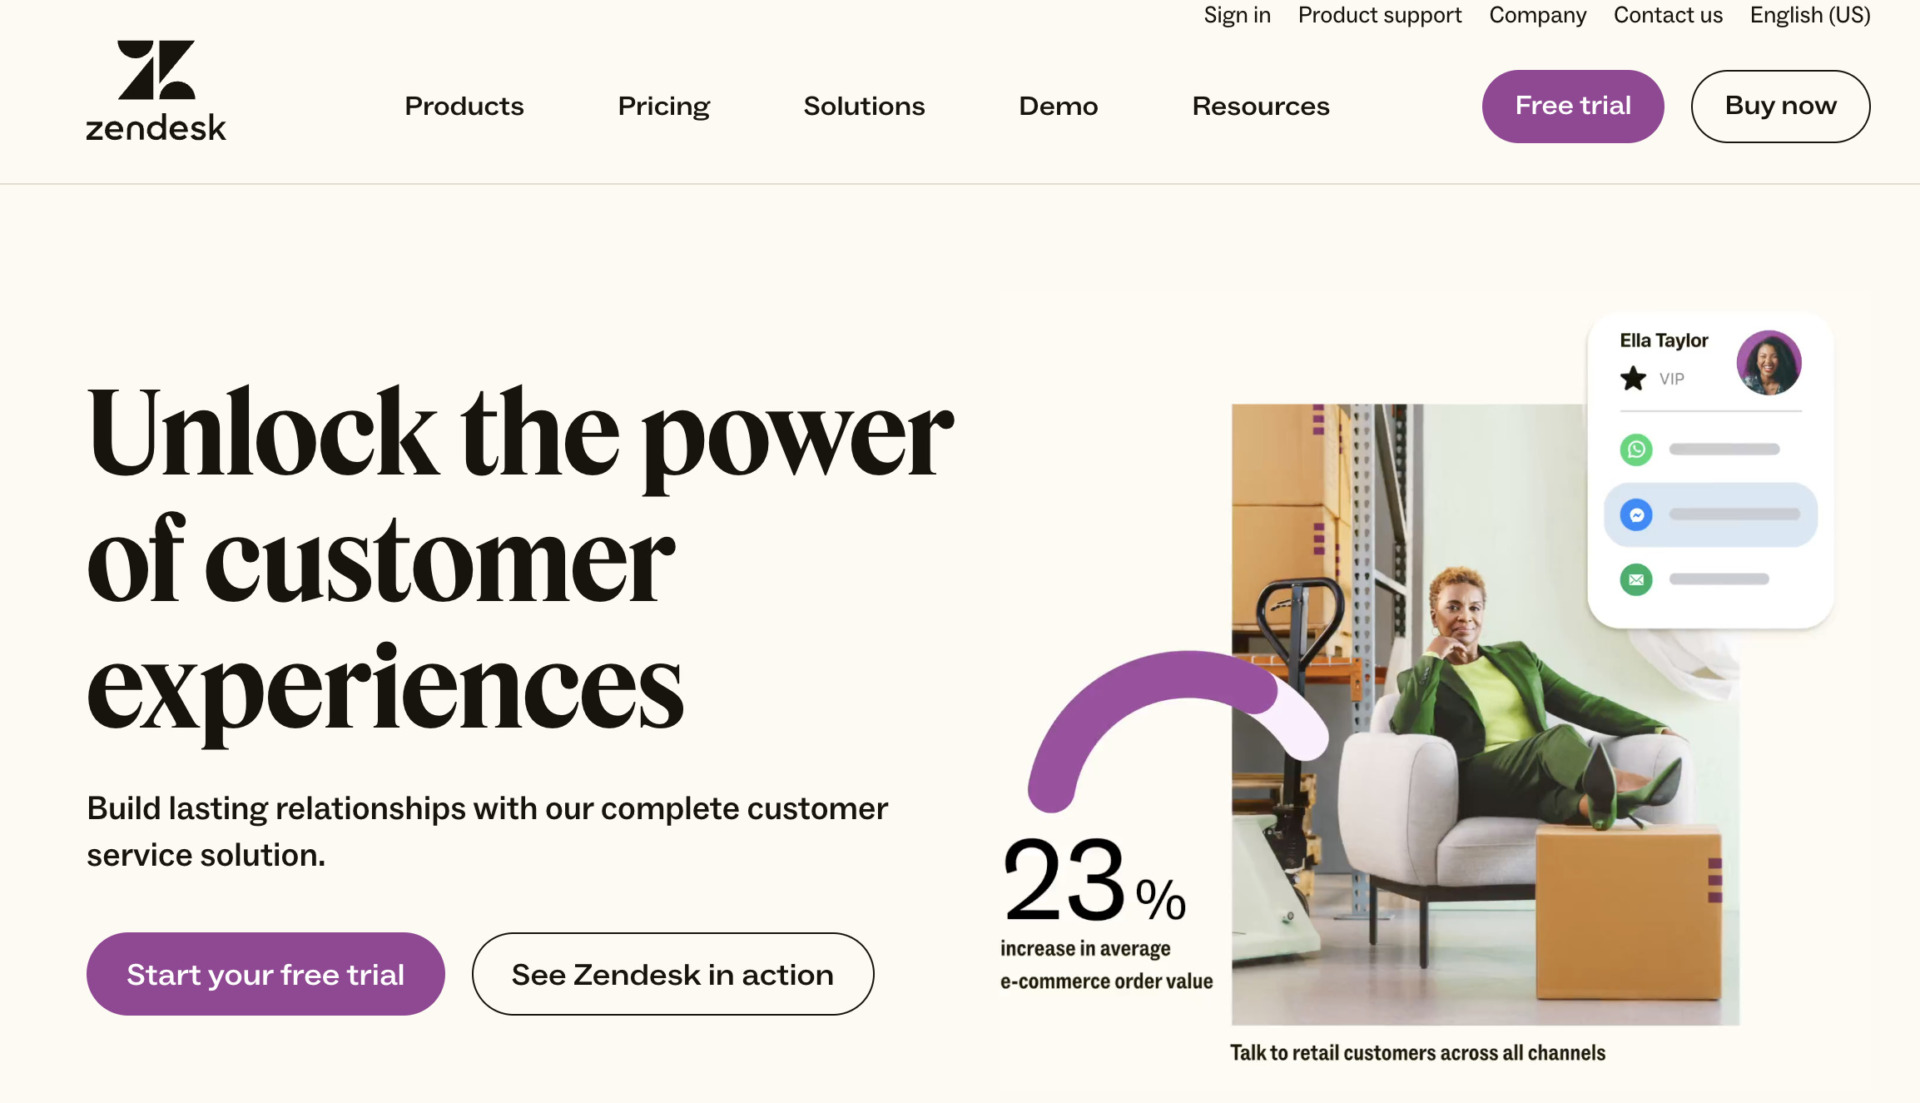 Top page of Zendesk